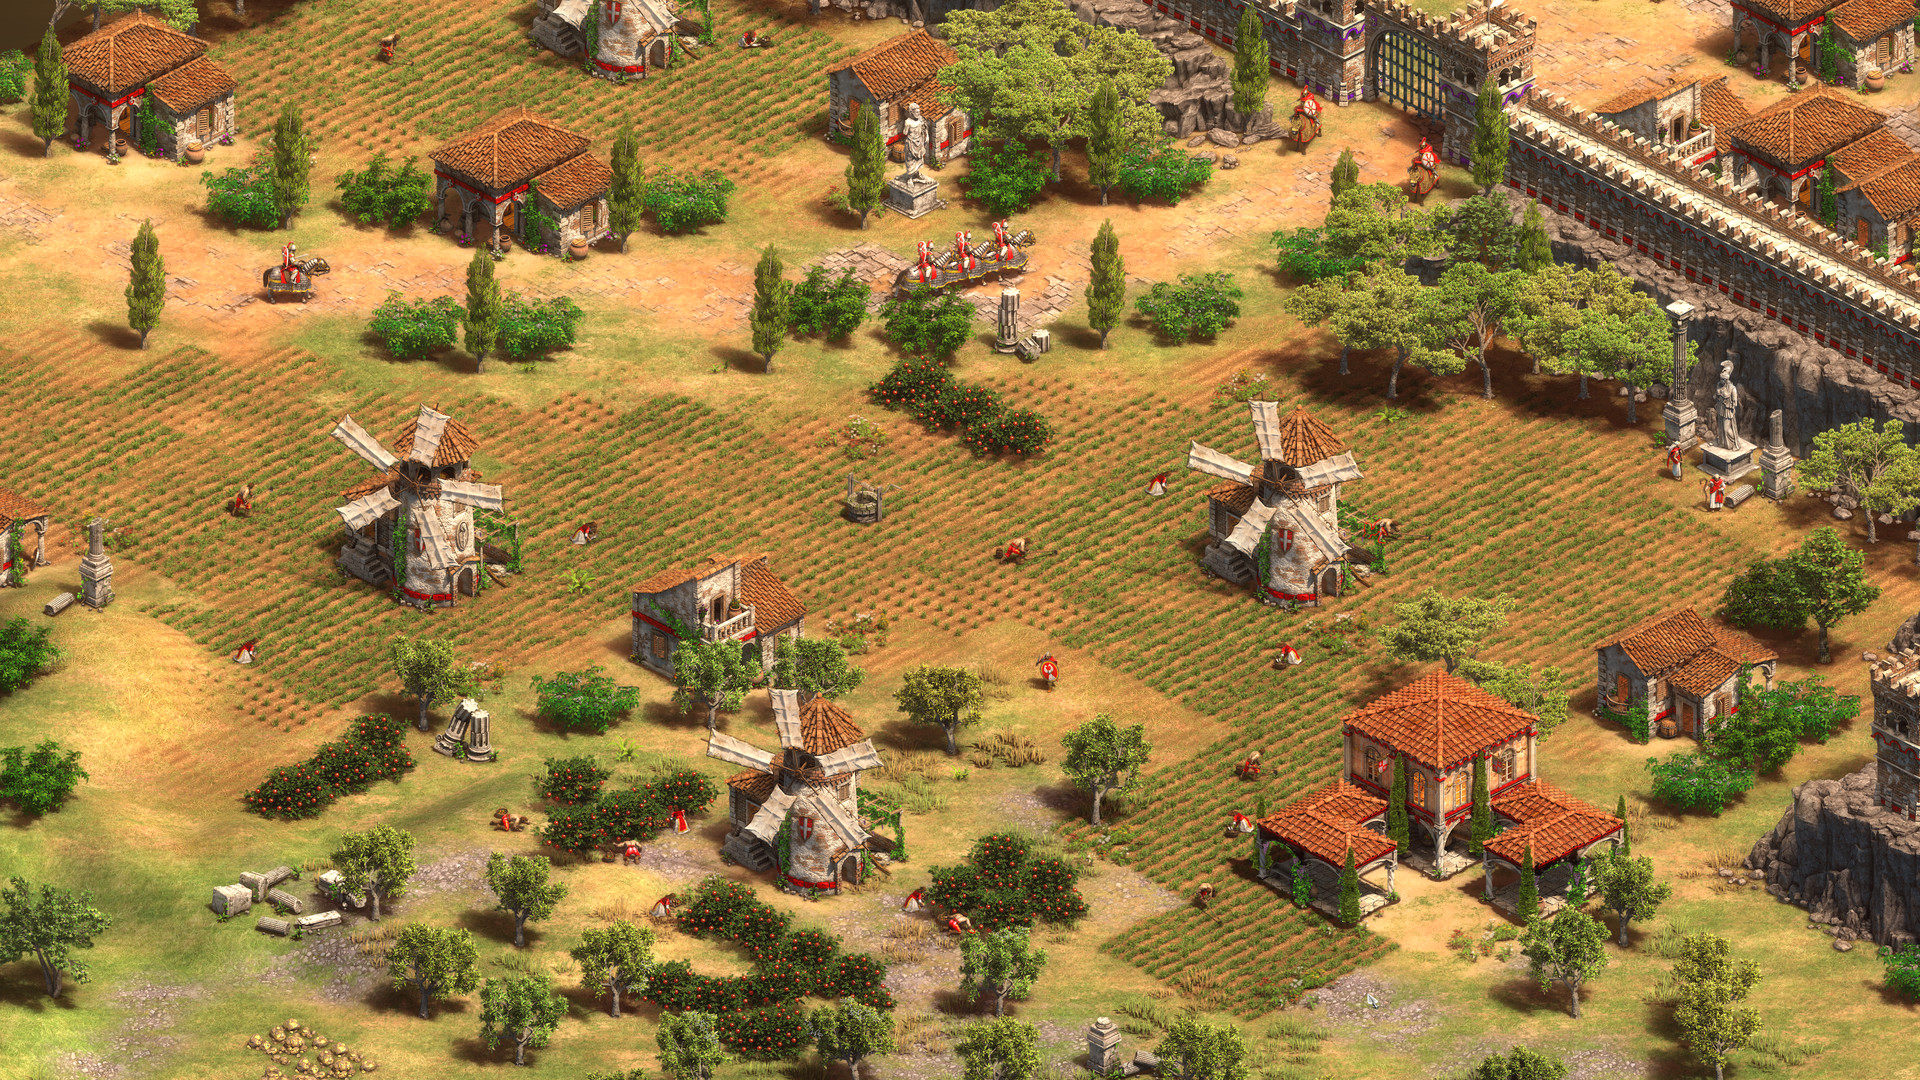 The old and new in Age of Empires 2 Definitive Edition